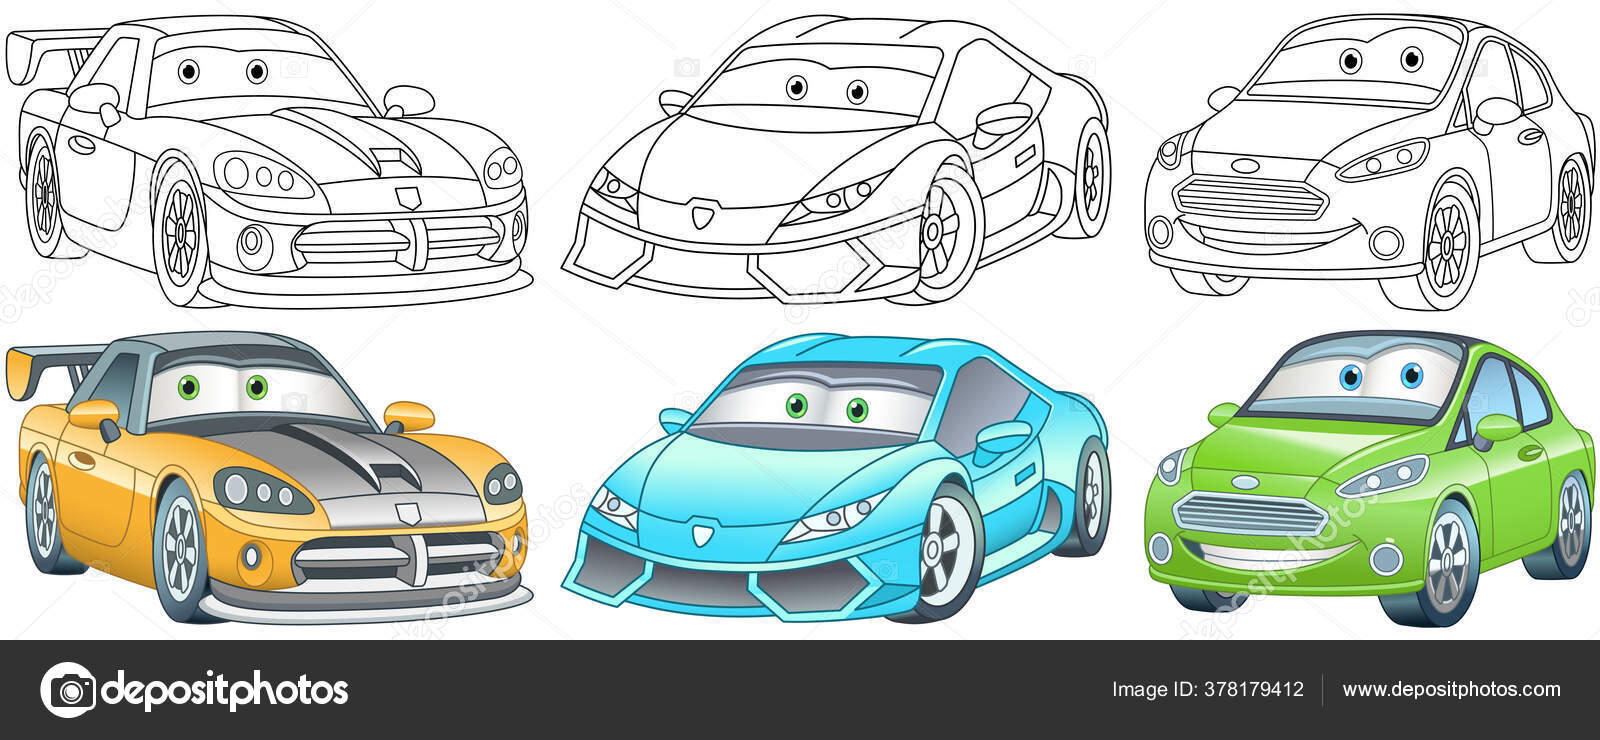 pixar cars characters coloring pages